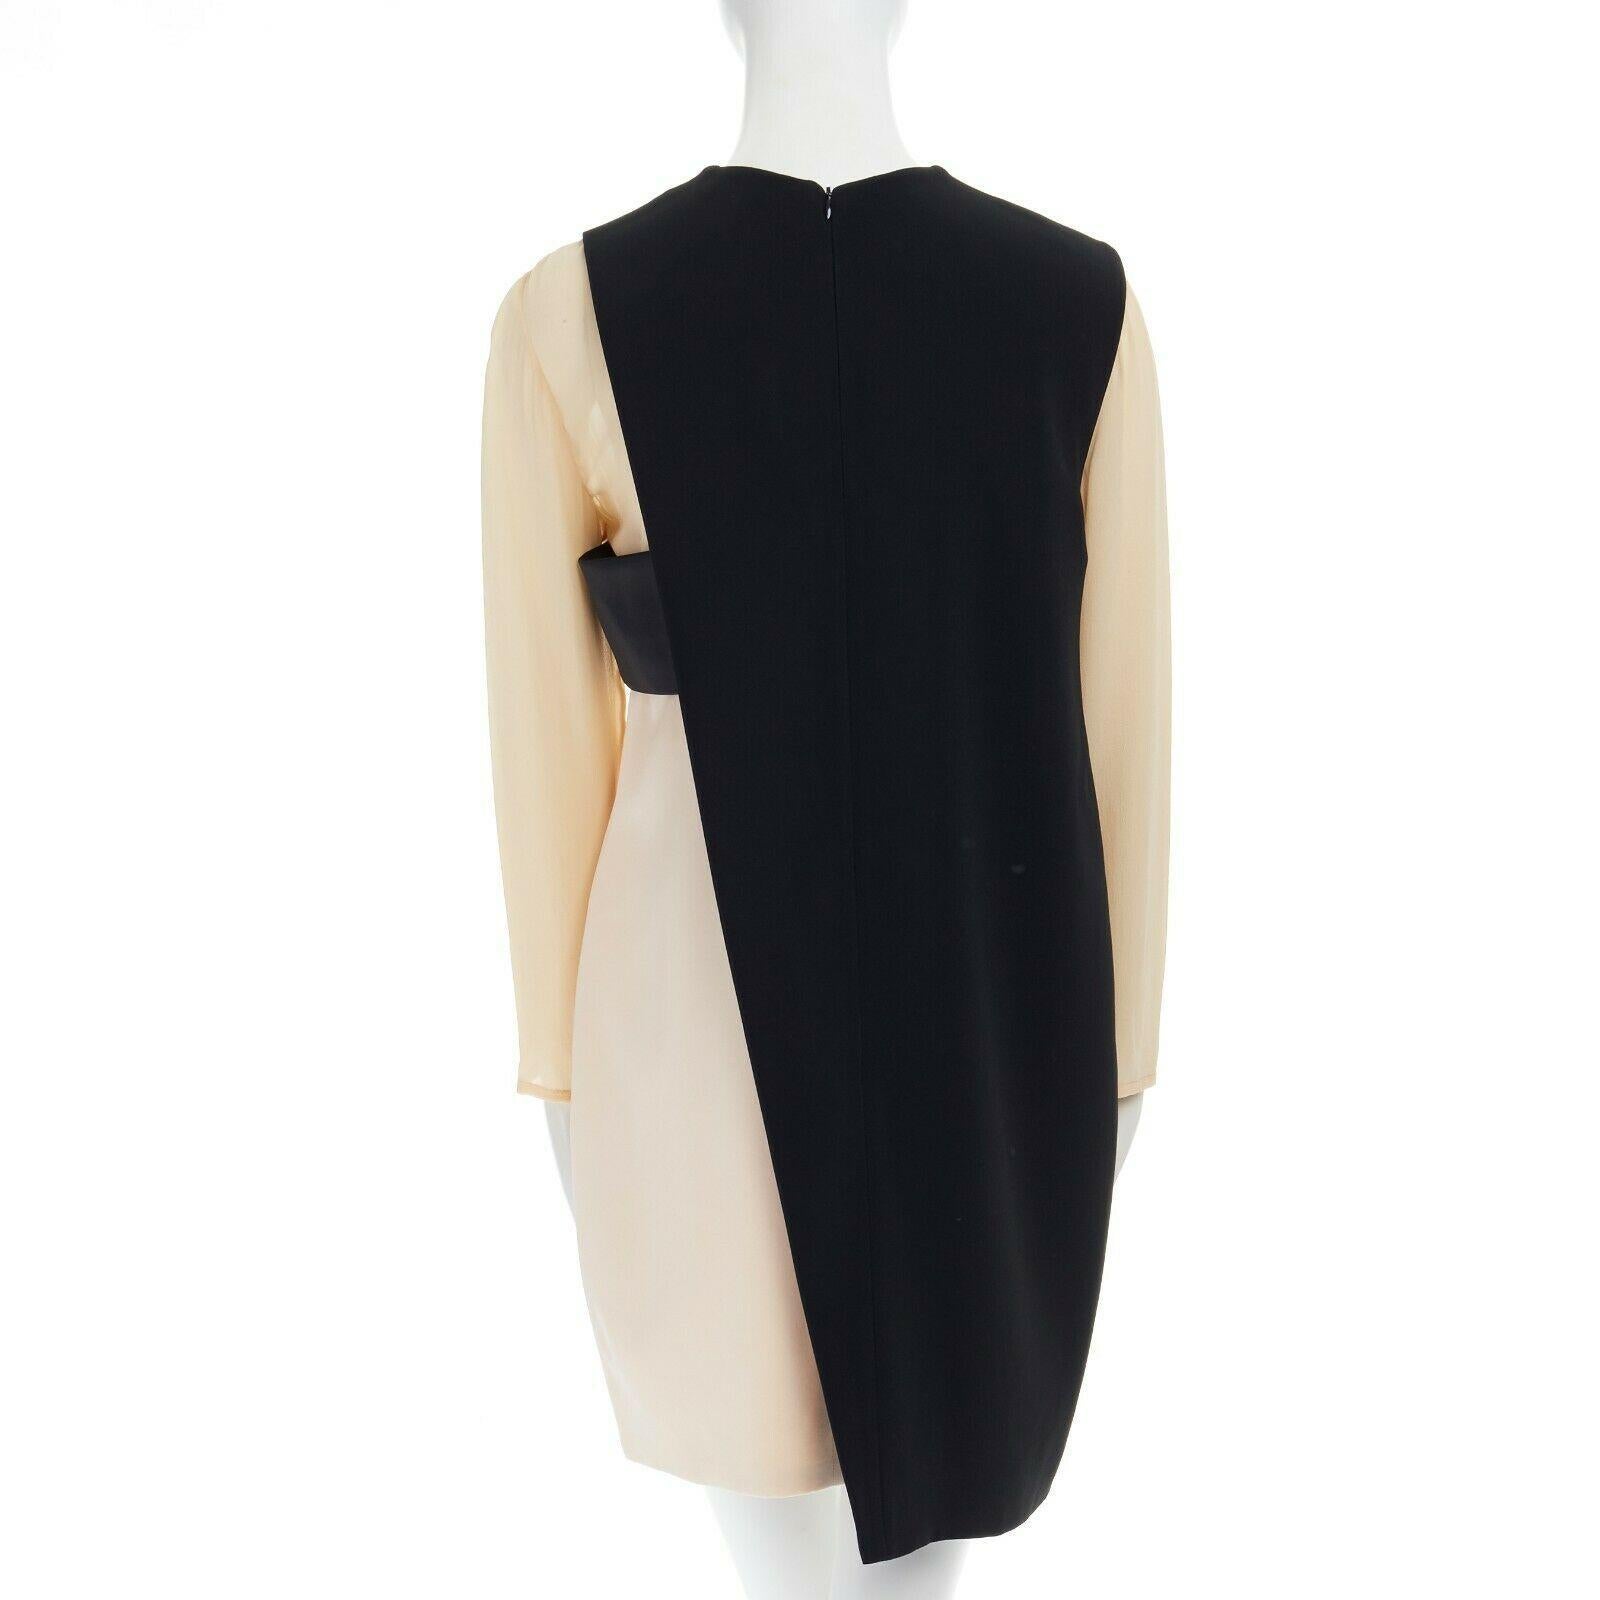 CELINE PHOEBE PHILO nude black asymmetric layered silk sleeve shift dress FR38

CELINE BY PHOEBE PHILO
Nude and black. Faux layered design. Round neck. Semi-sheer silk long sleeves. Asymmetric black attached layer design. Silk band at bust.